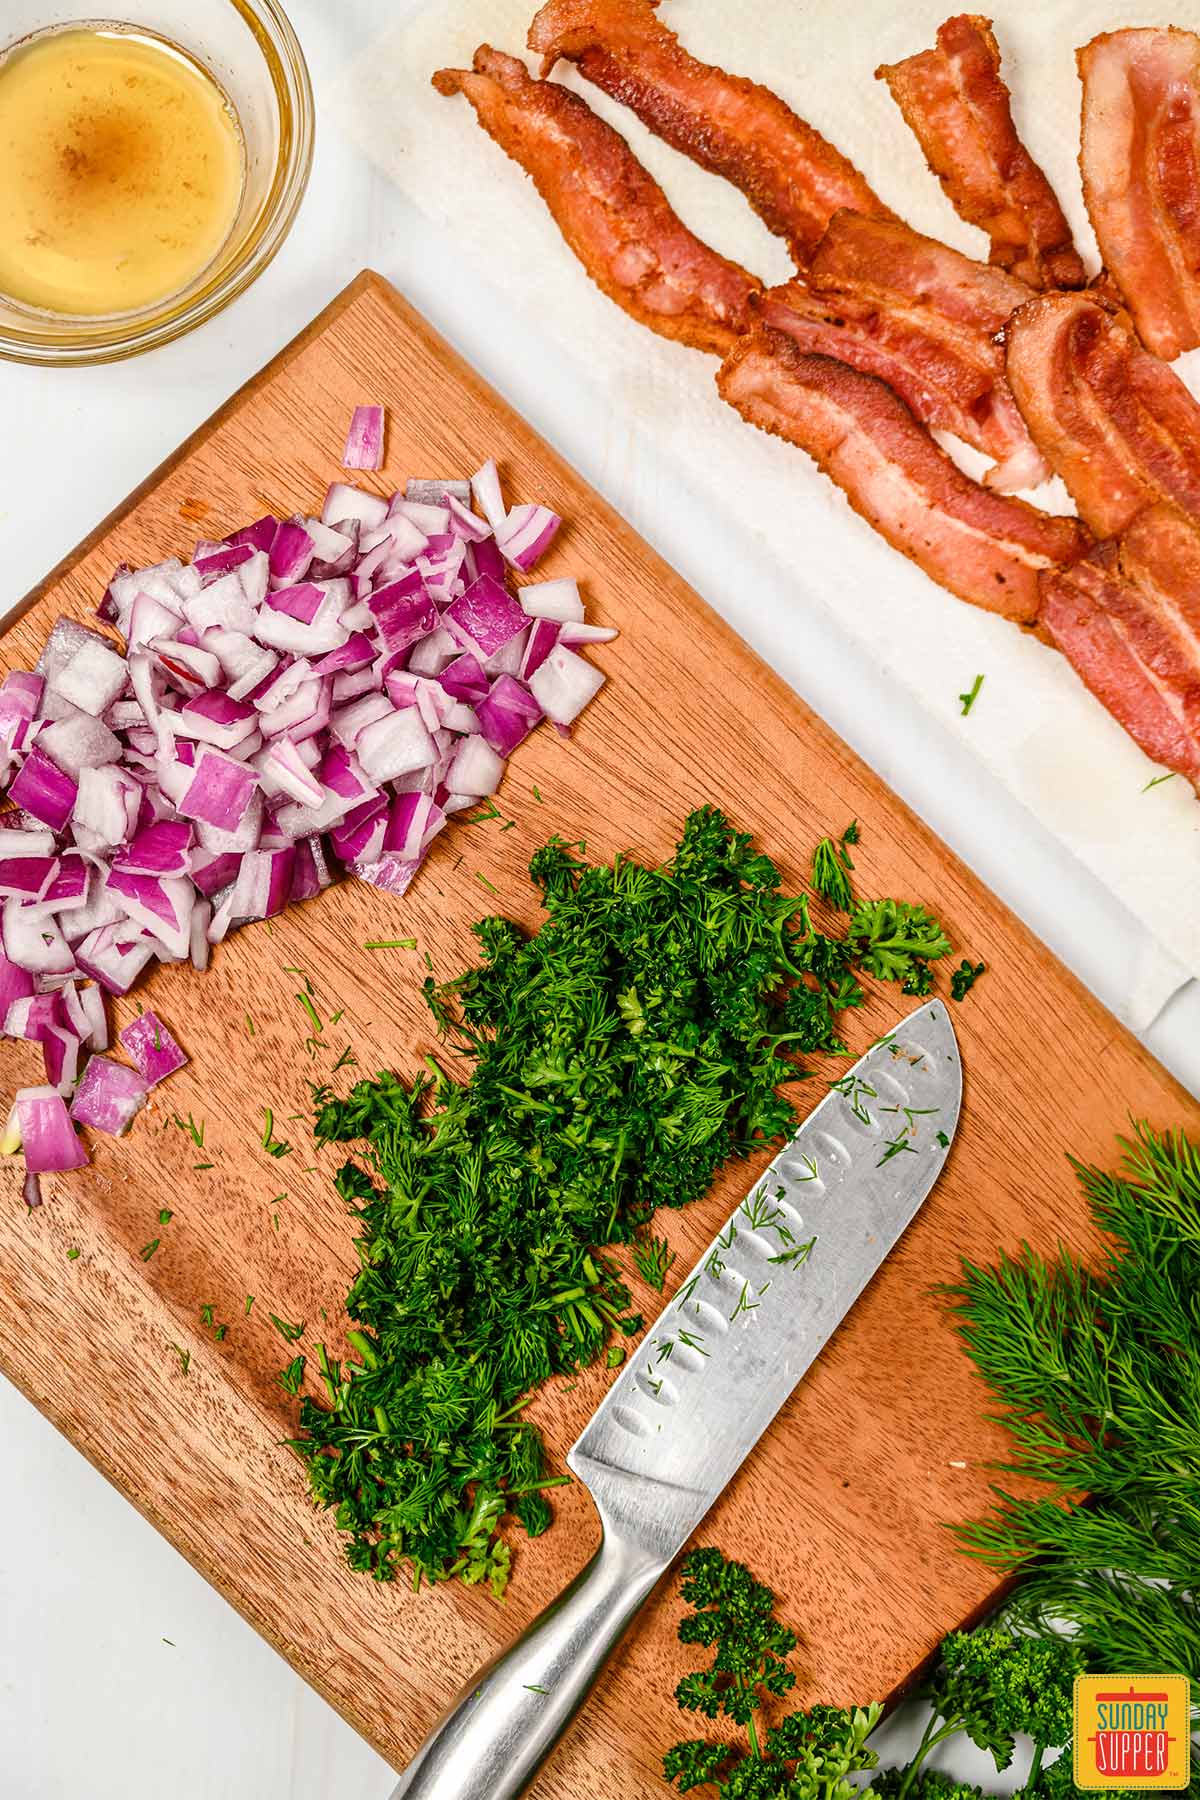 Chopped herbs and onions next to cooked bacon